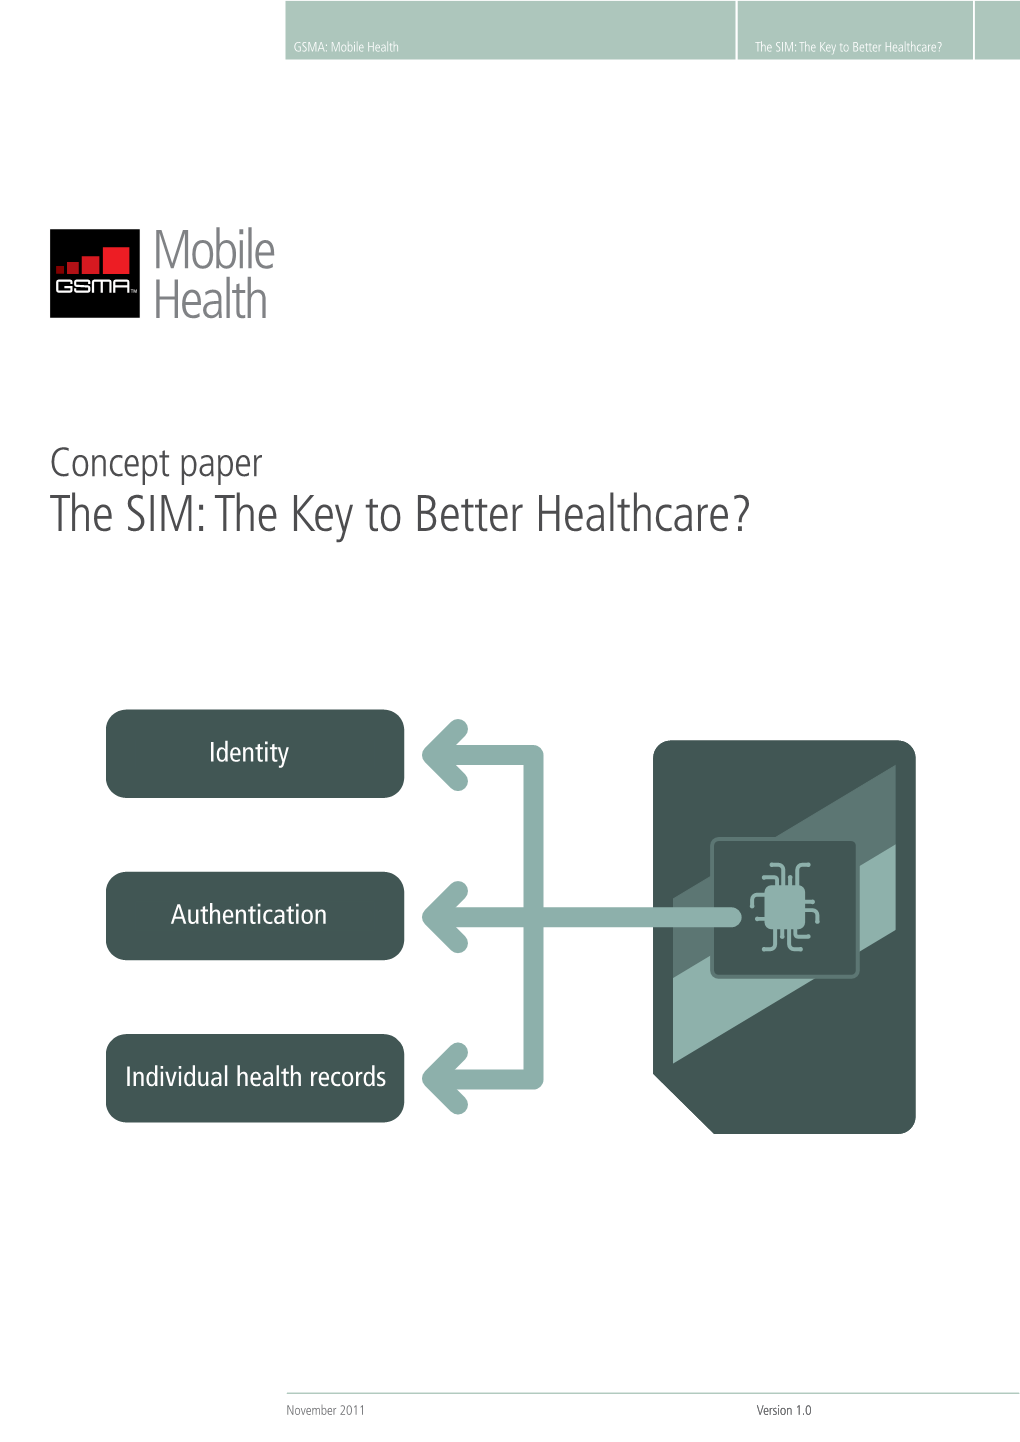 The SIM: the Key to Better Healthcare?